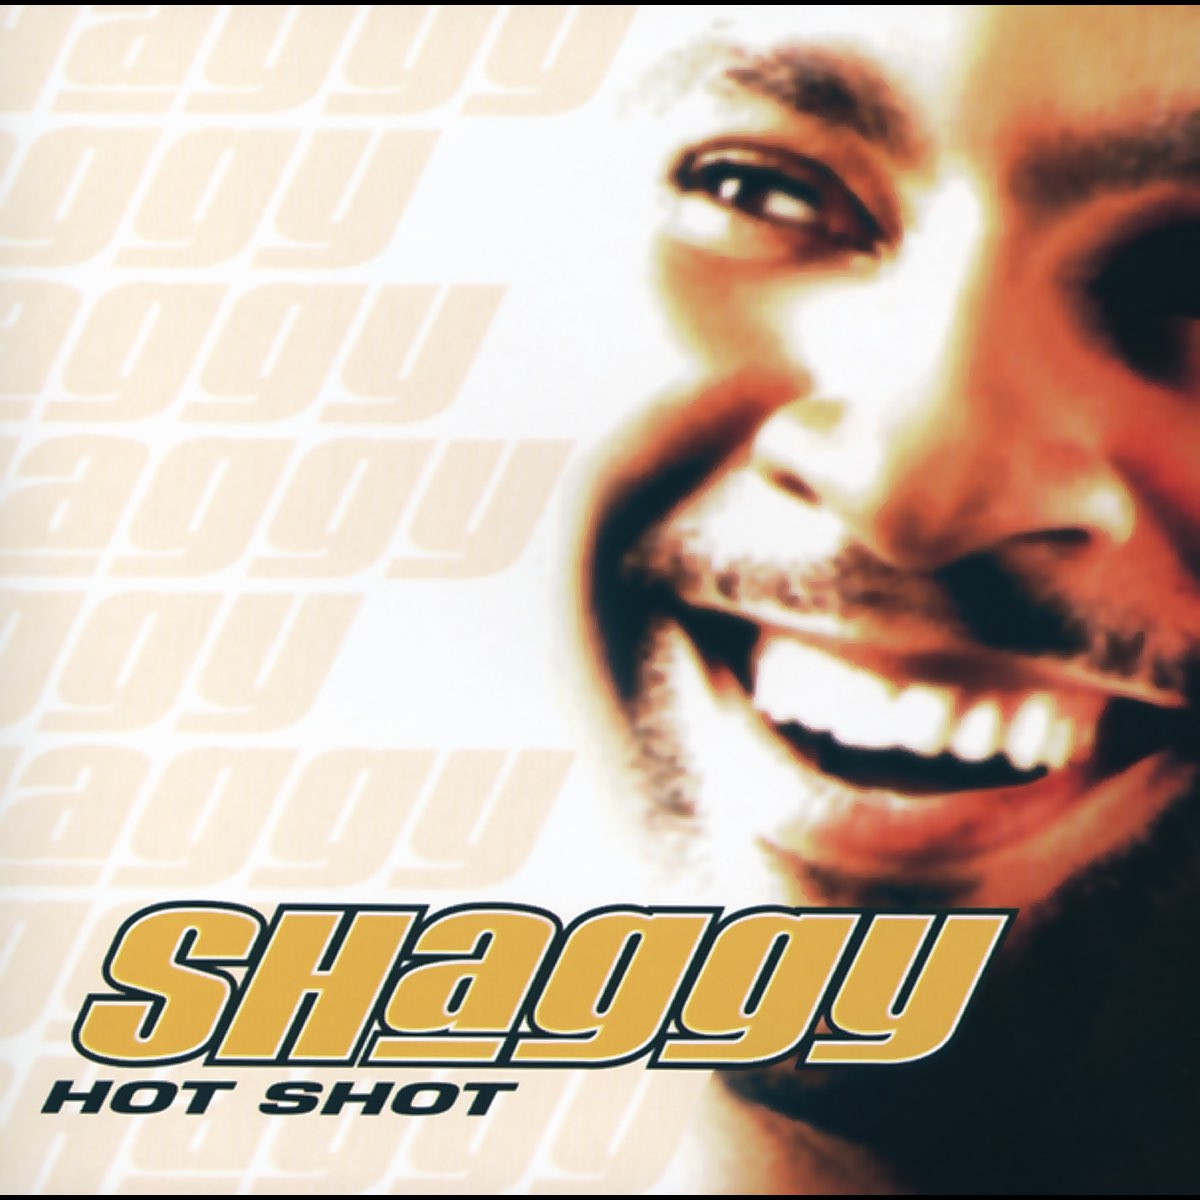 ‎Hot Shot by Shaggy on Apple Music